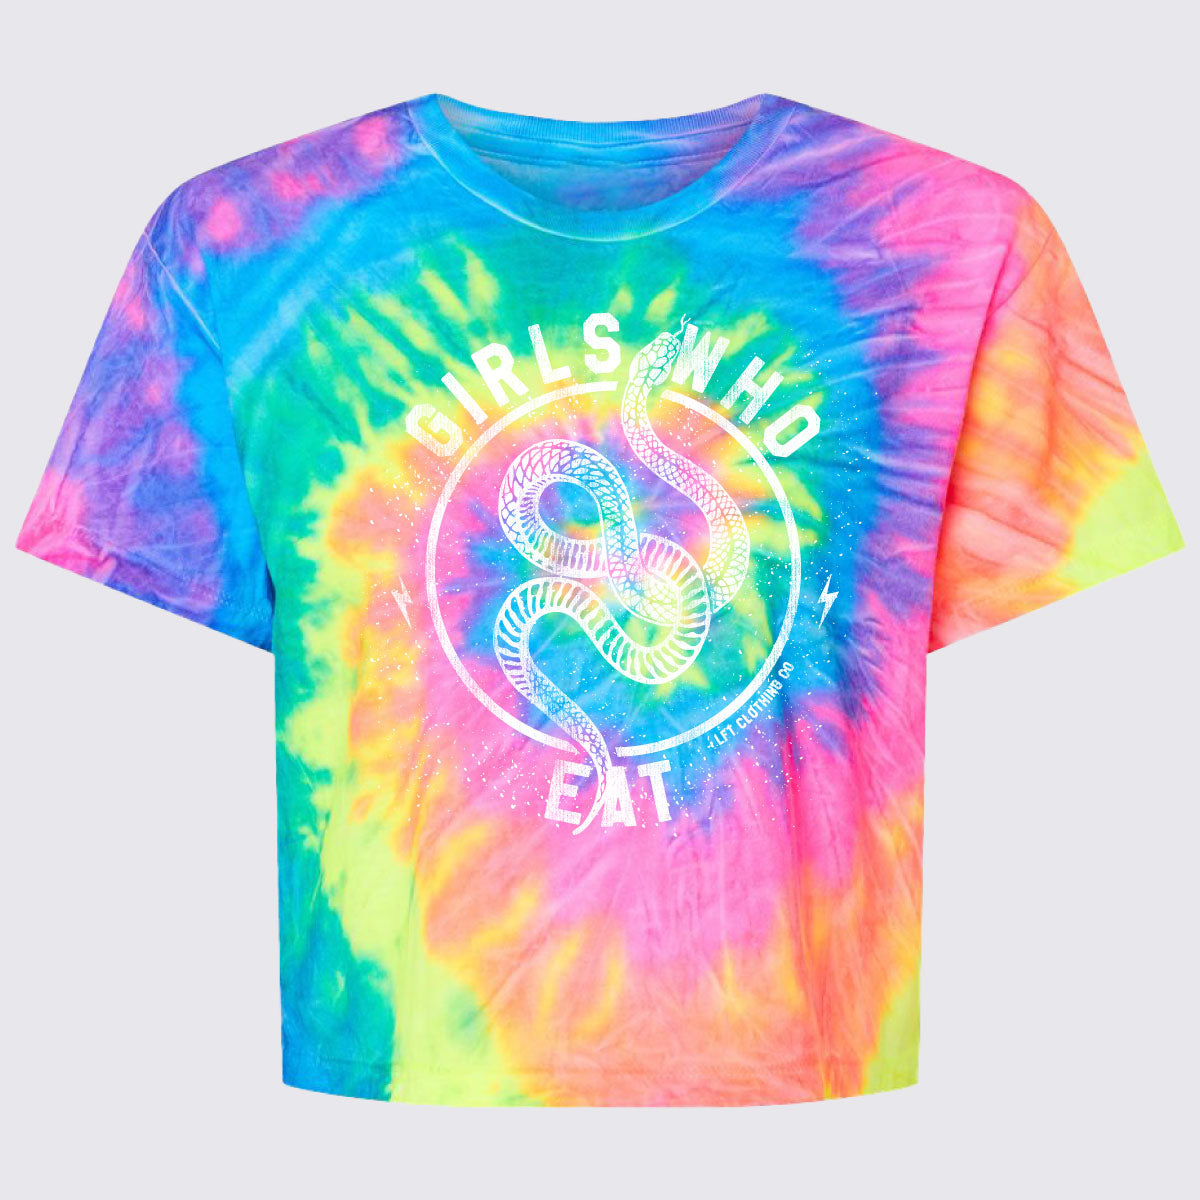 komplikationer overse Transcend Girls Who Eat Women's Tie-Dyed Crop T-Shirt - The LFT Clothing Company